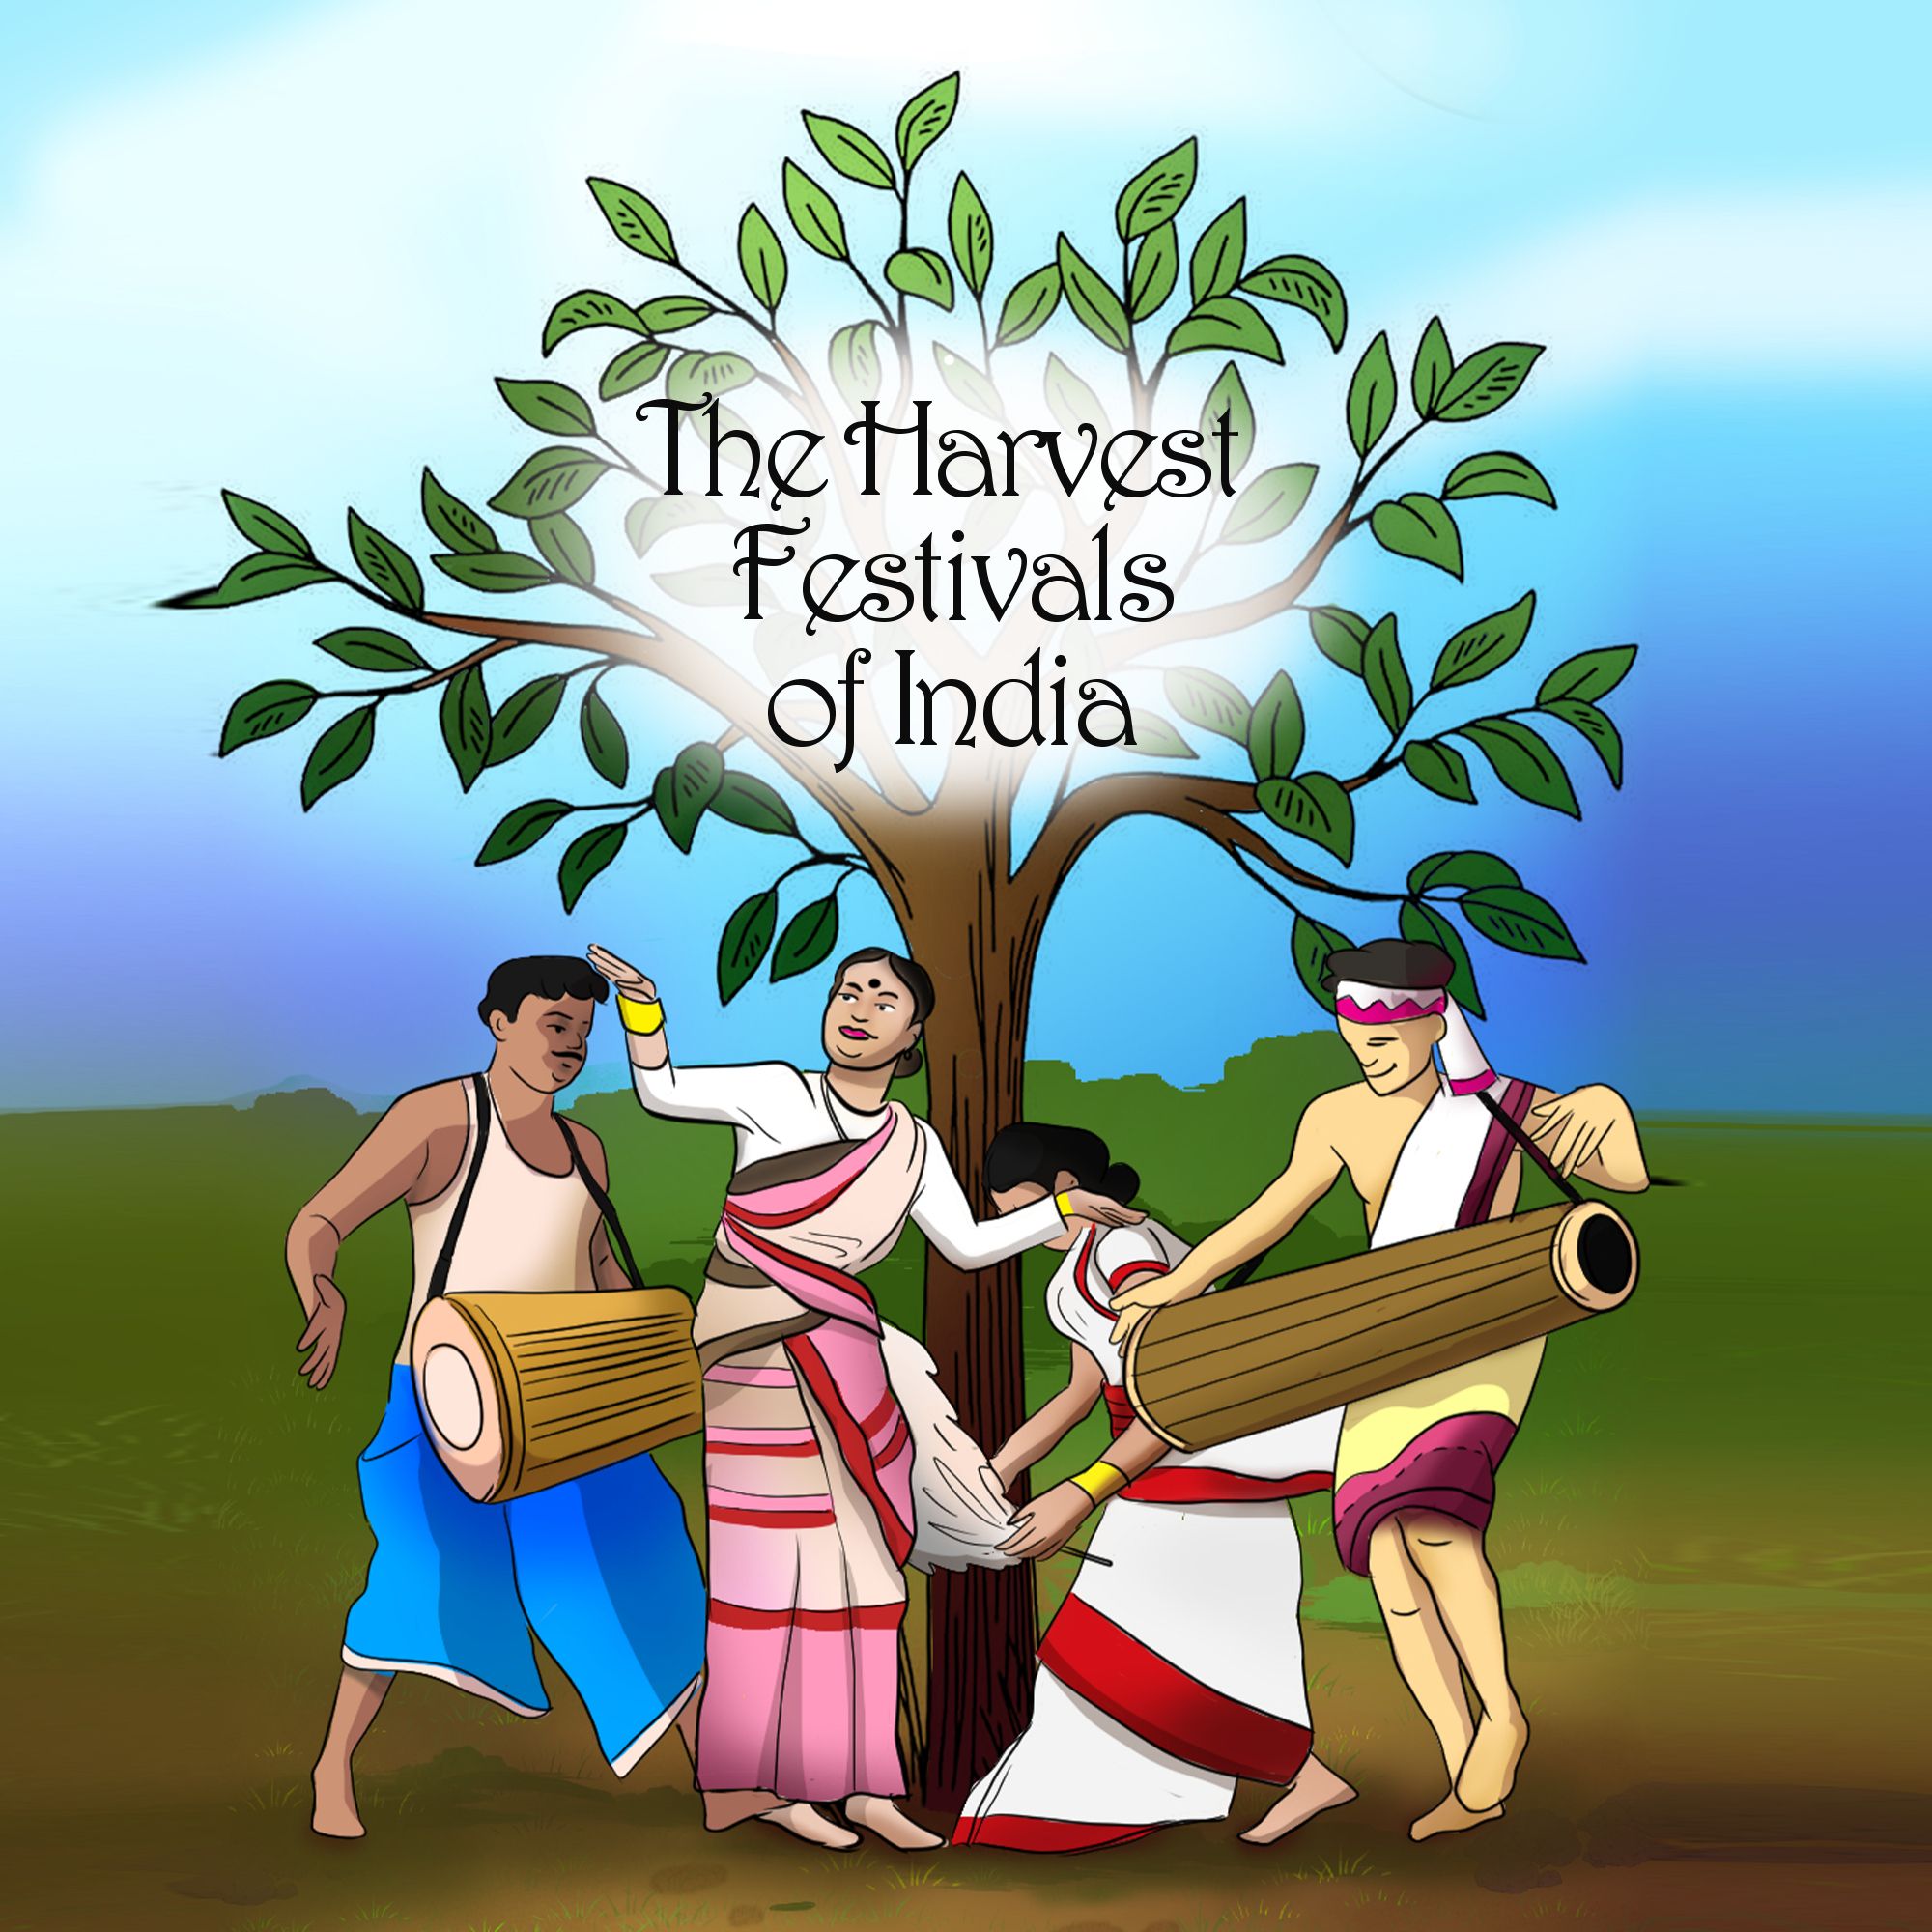 The Harvest Festivals of India